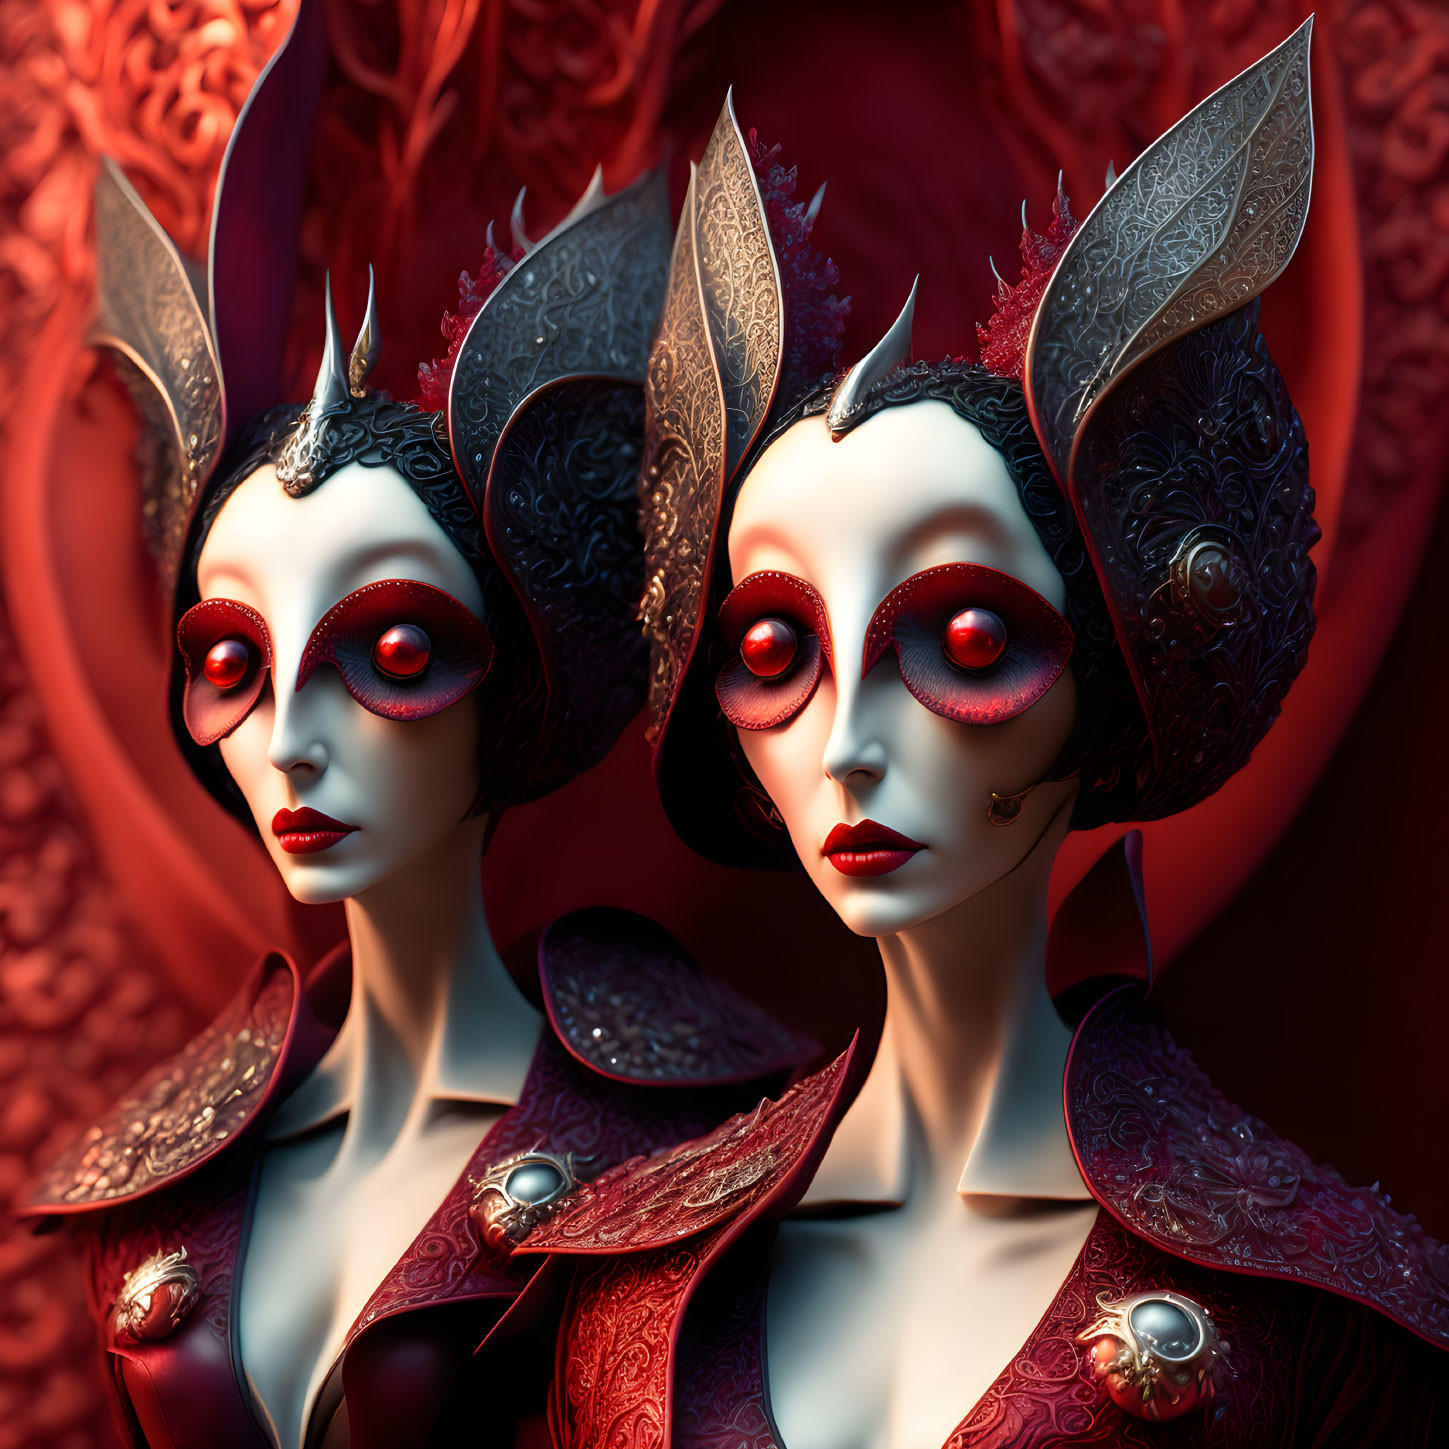 Stylized figures in red and black costumes with intricate headpieces and expressive eyes